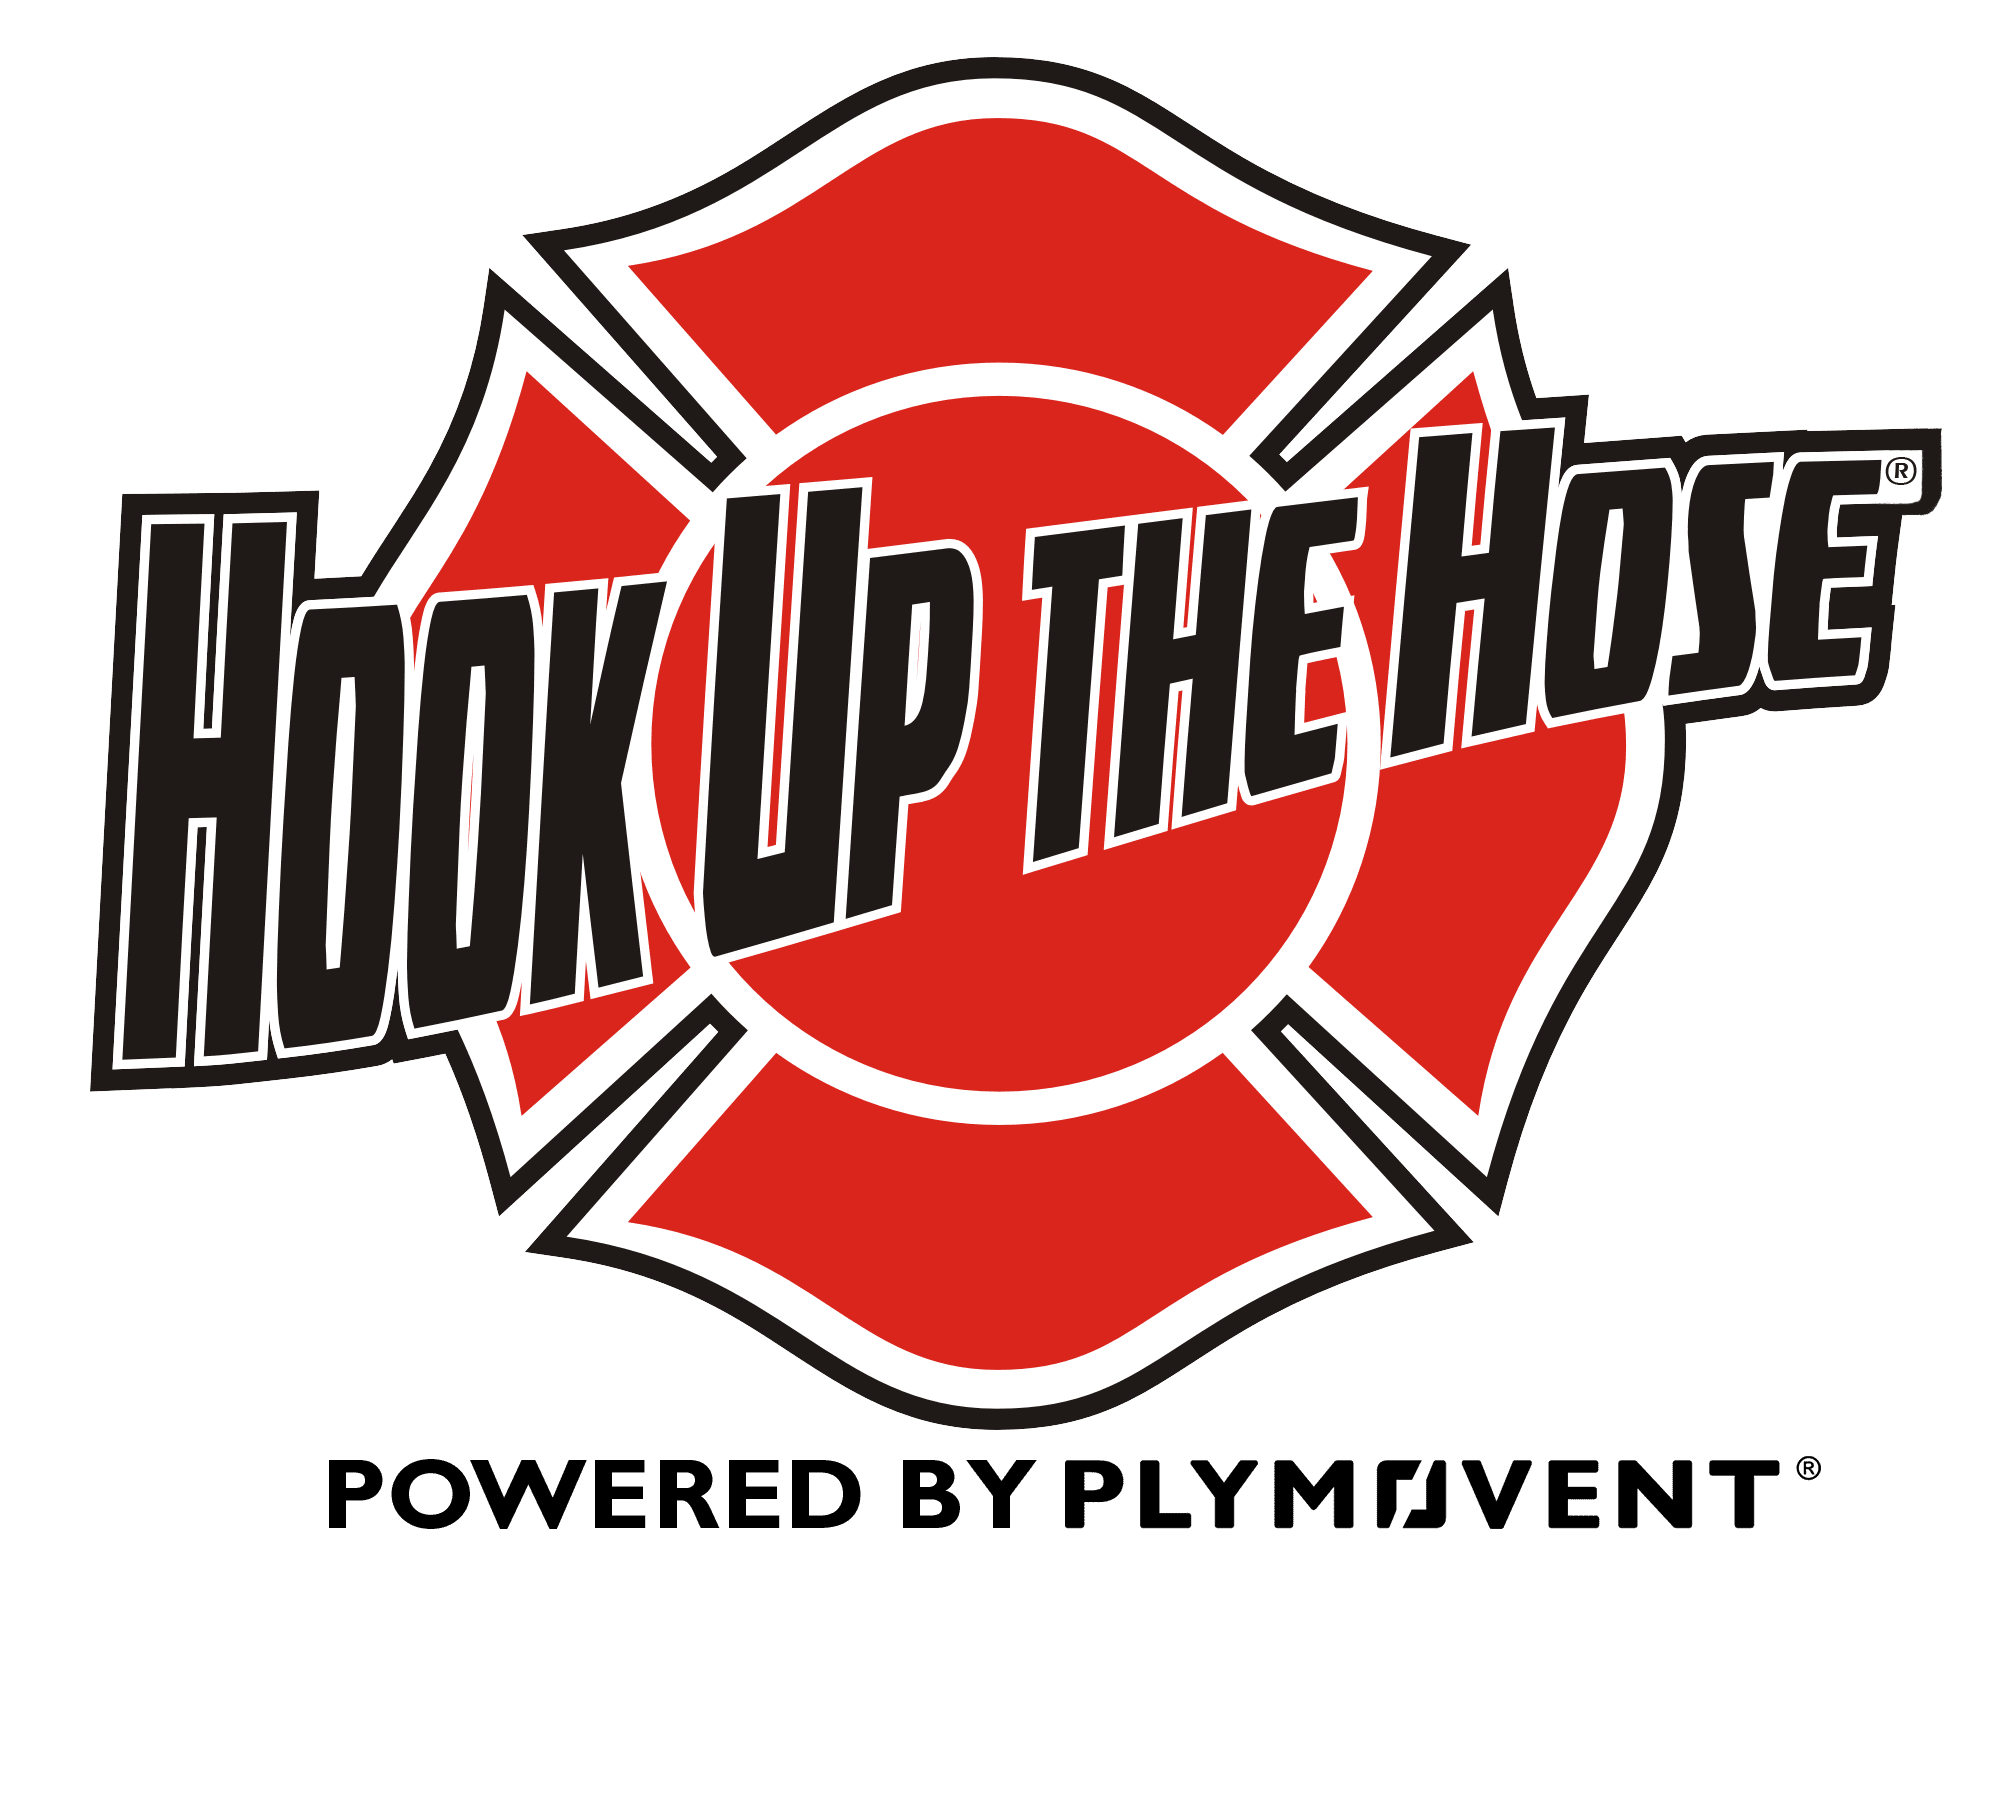 Hook up the hose - Powered by Plymovent